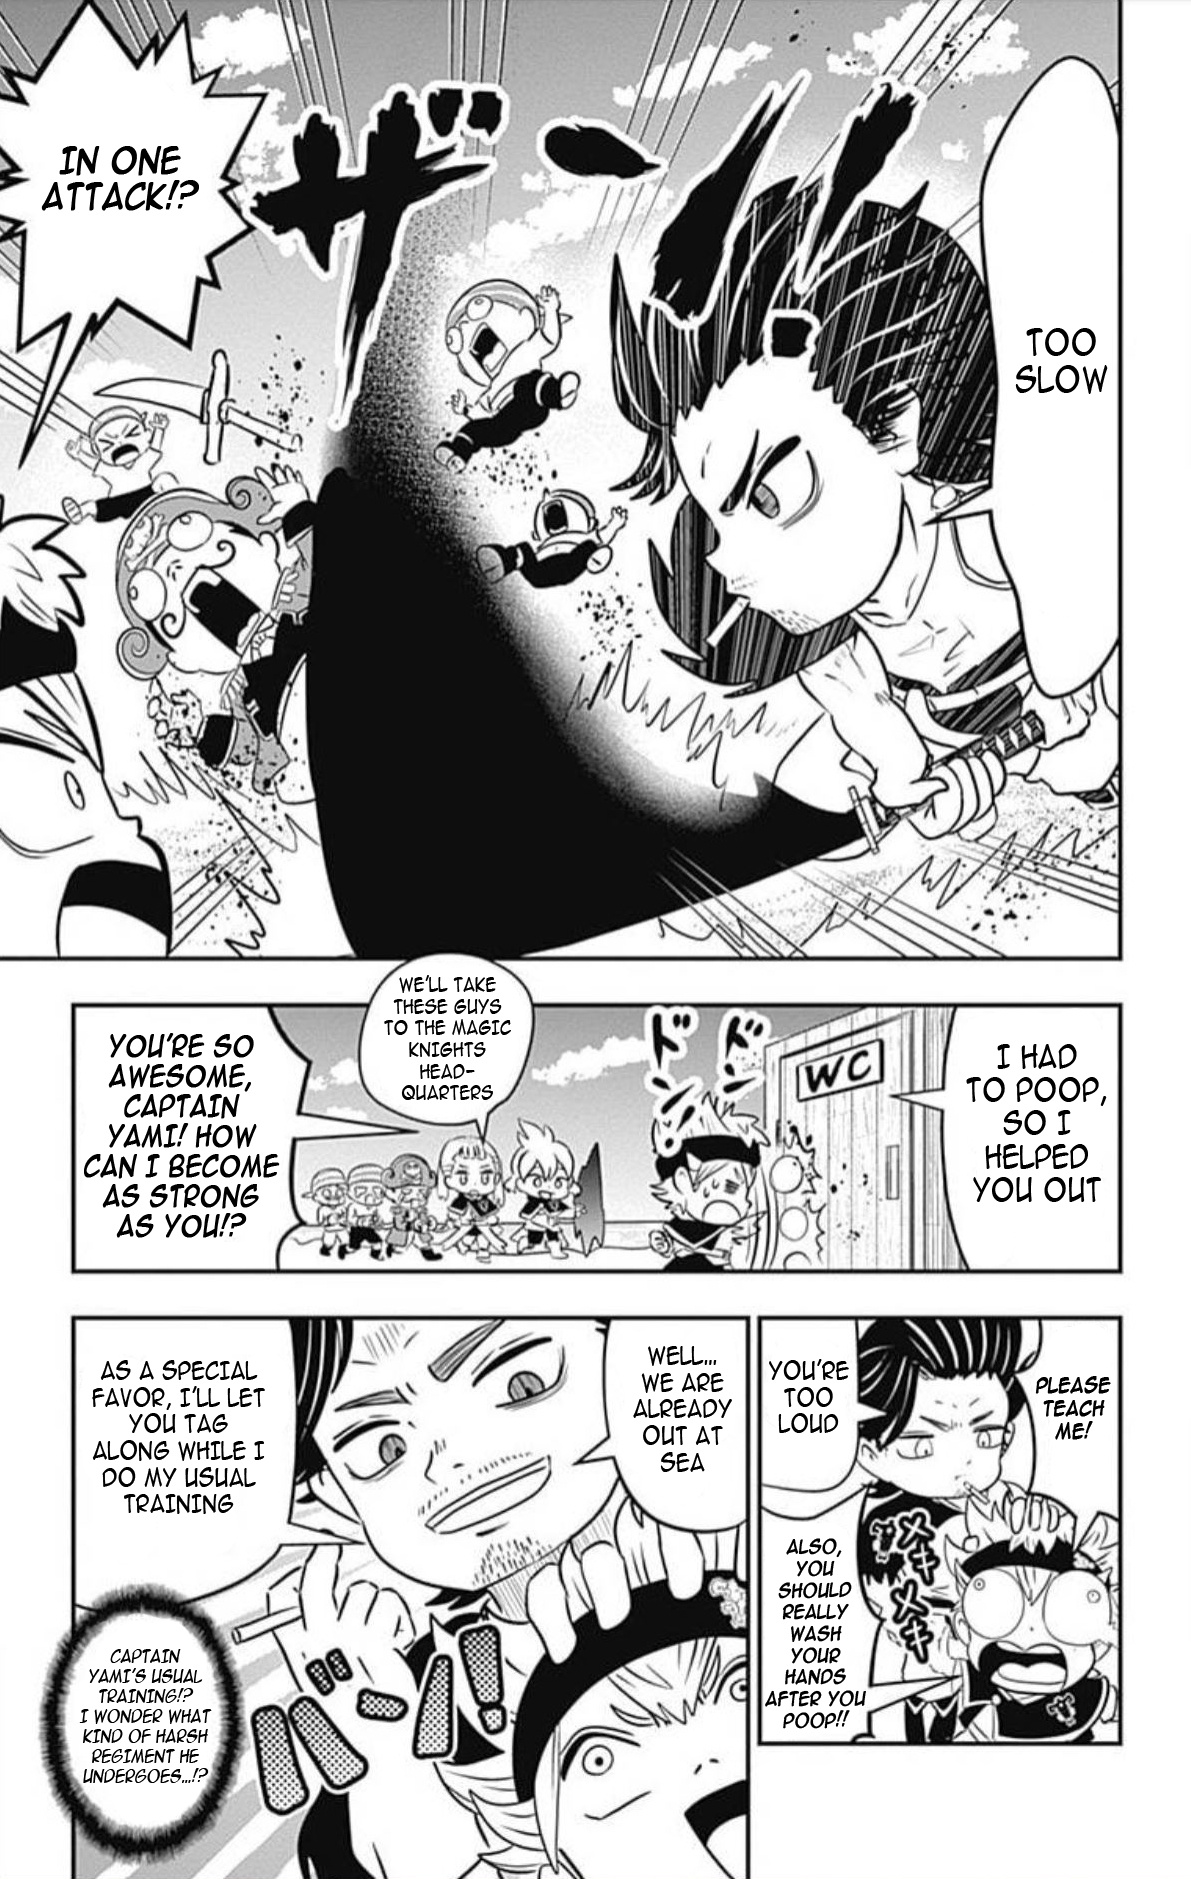 Black Clover Sd - Asta's Road To The Wizard King Vol.3 Chapter 11: Showdown At The Mysterious Ghost Ship!! - Picture 3